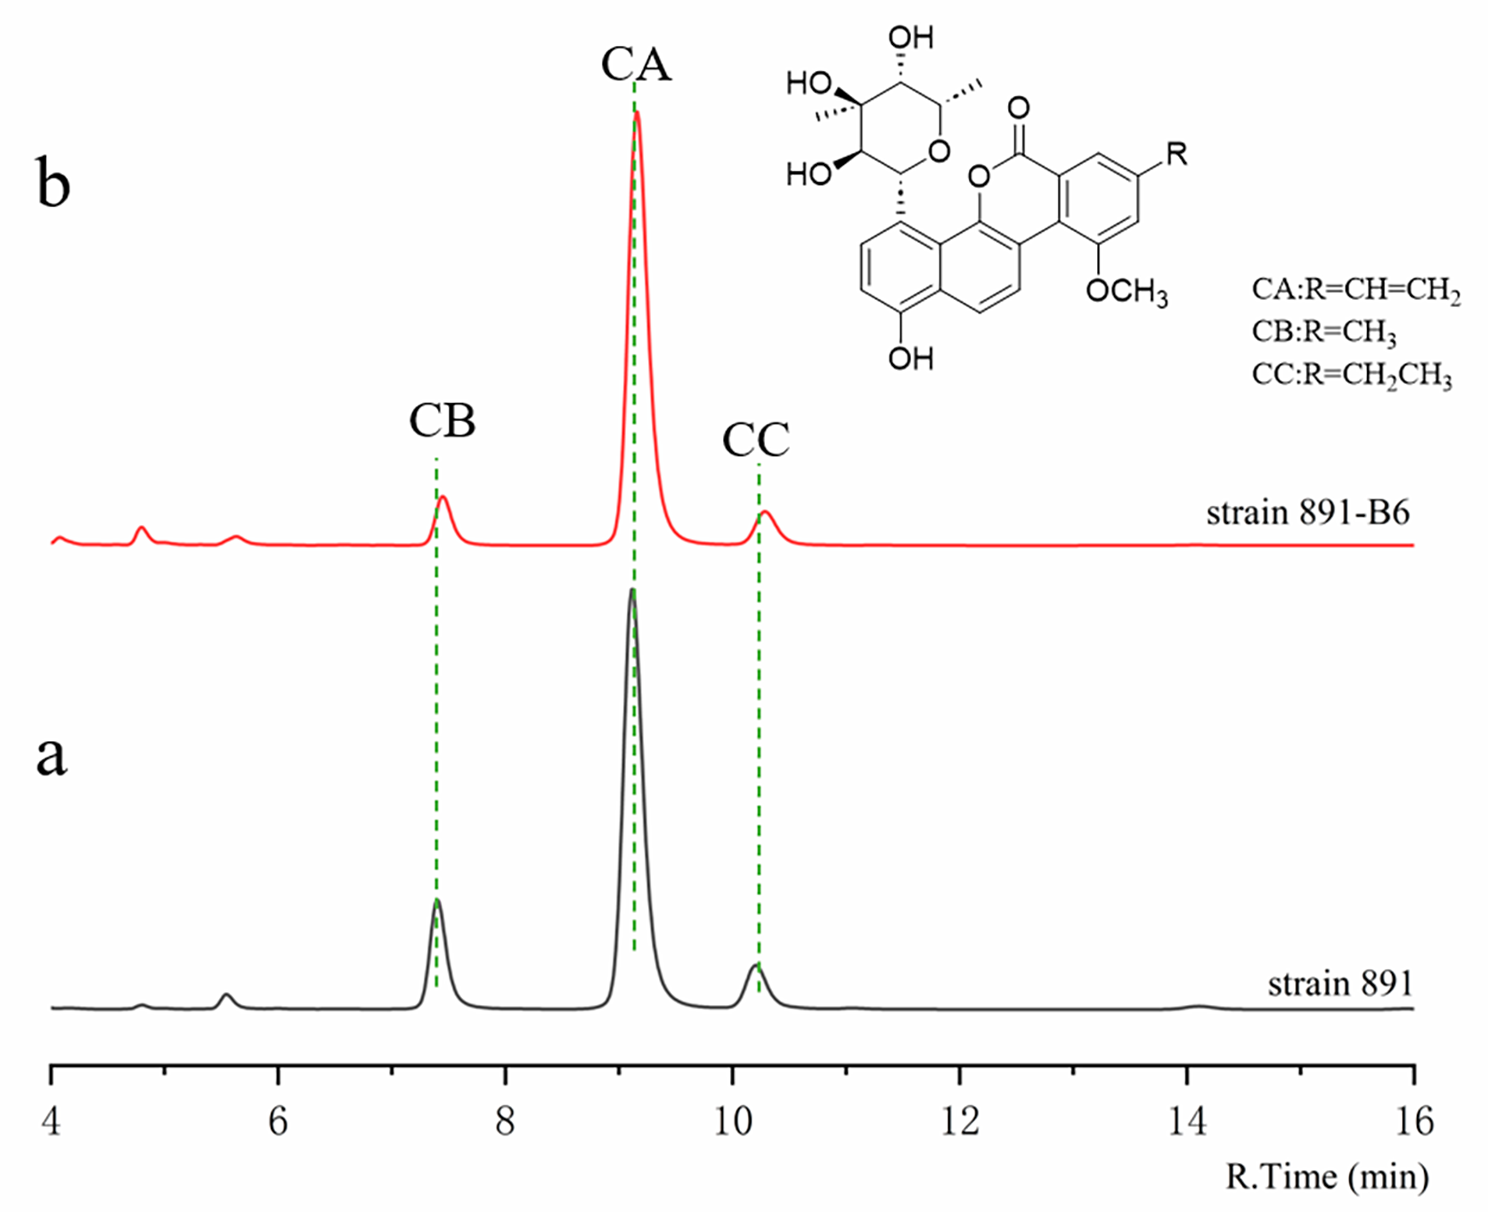 Optimization of fermentation conditions and medium components for chrysomycin a production by Streptomyces sp. 891-B6